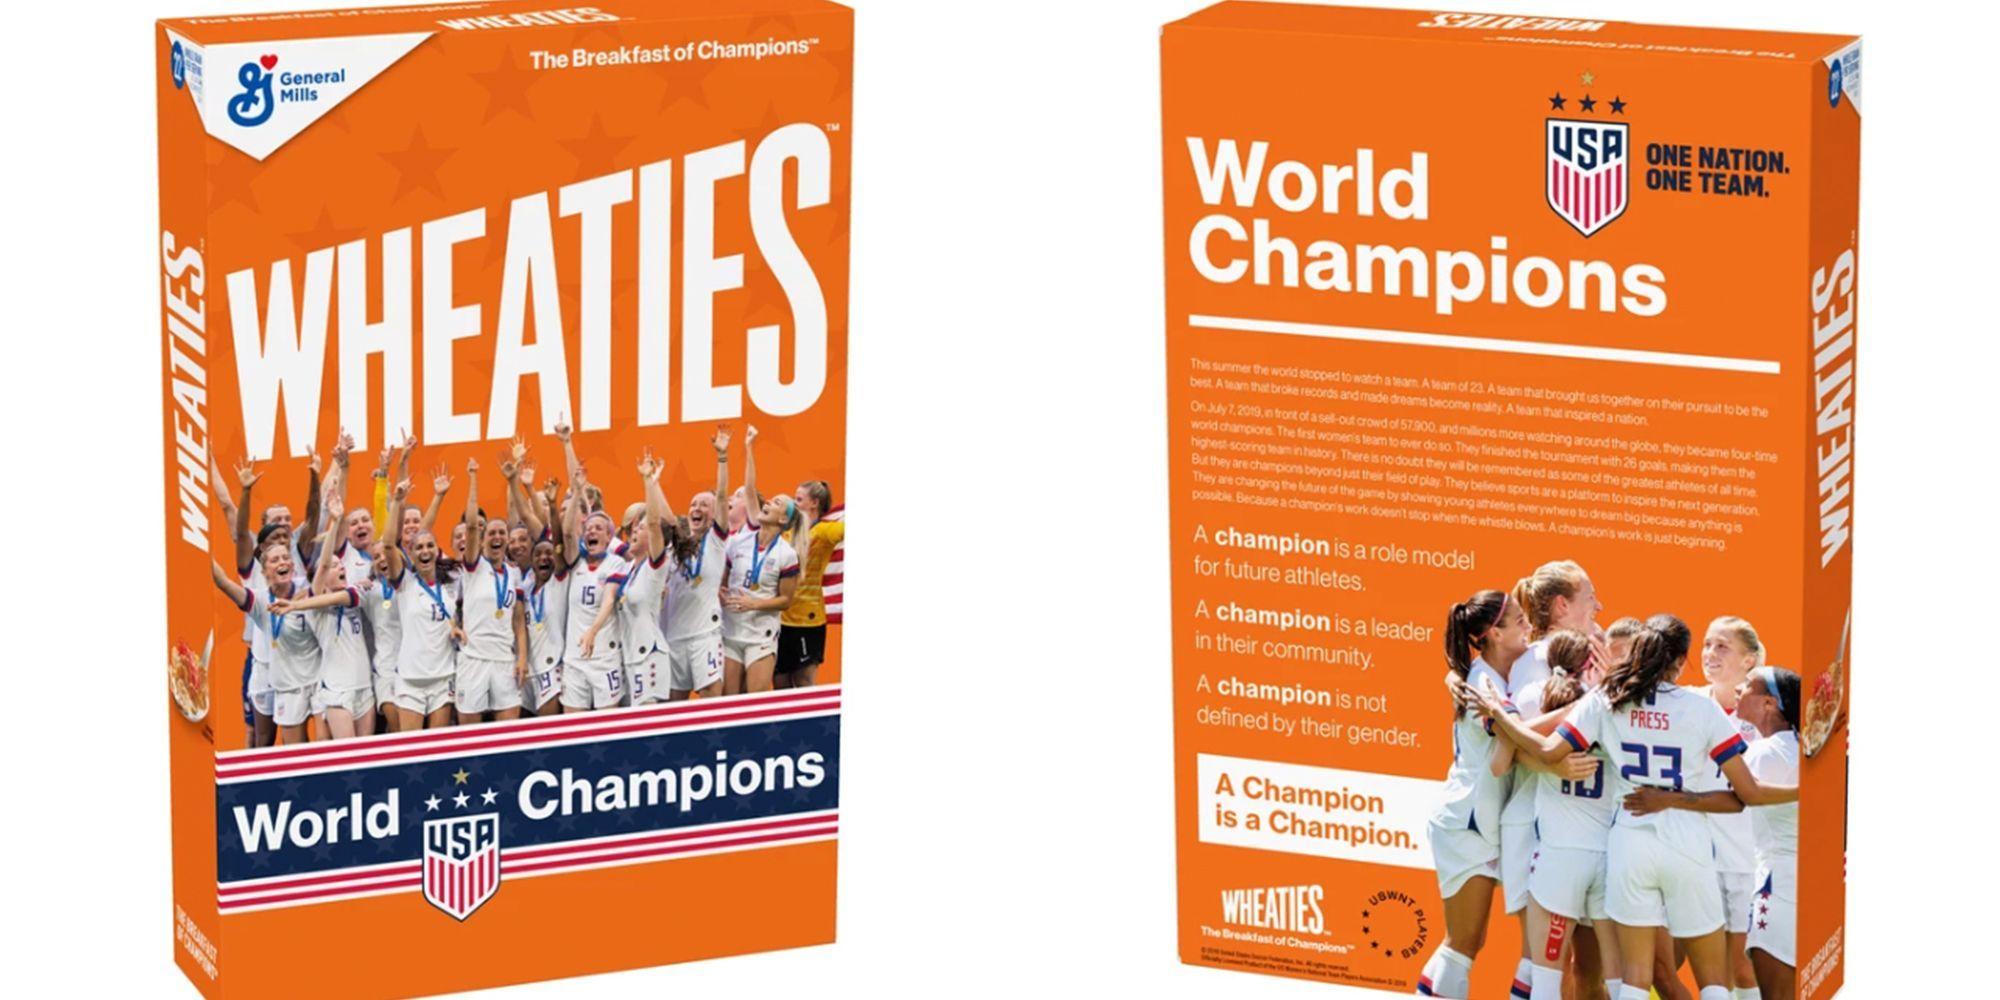 Wheaties Logo - The U.S. Women's National Soccer Team Was Honored With A Wheaties Box